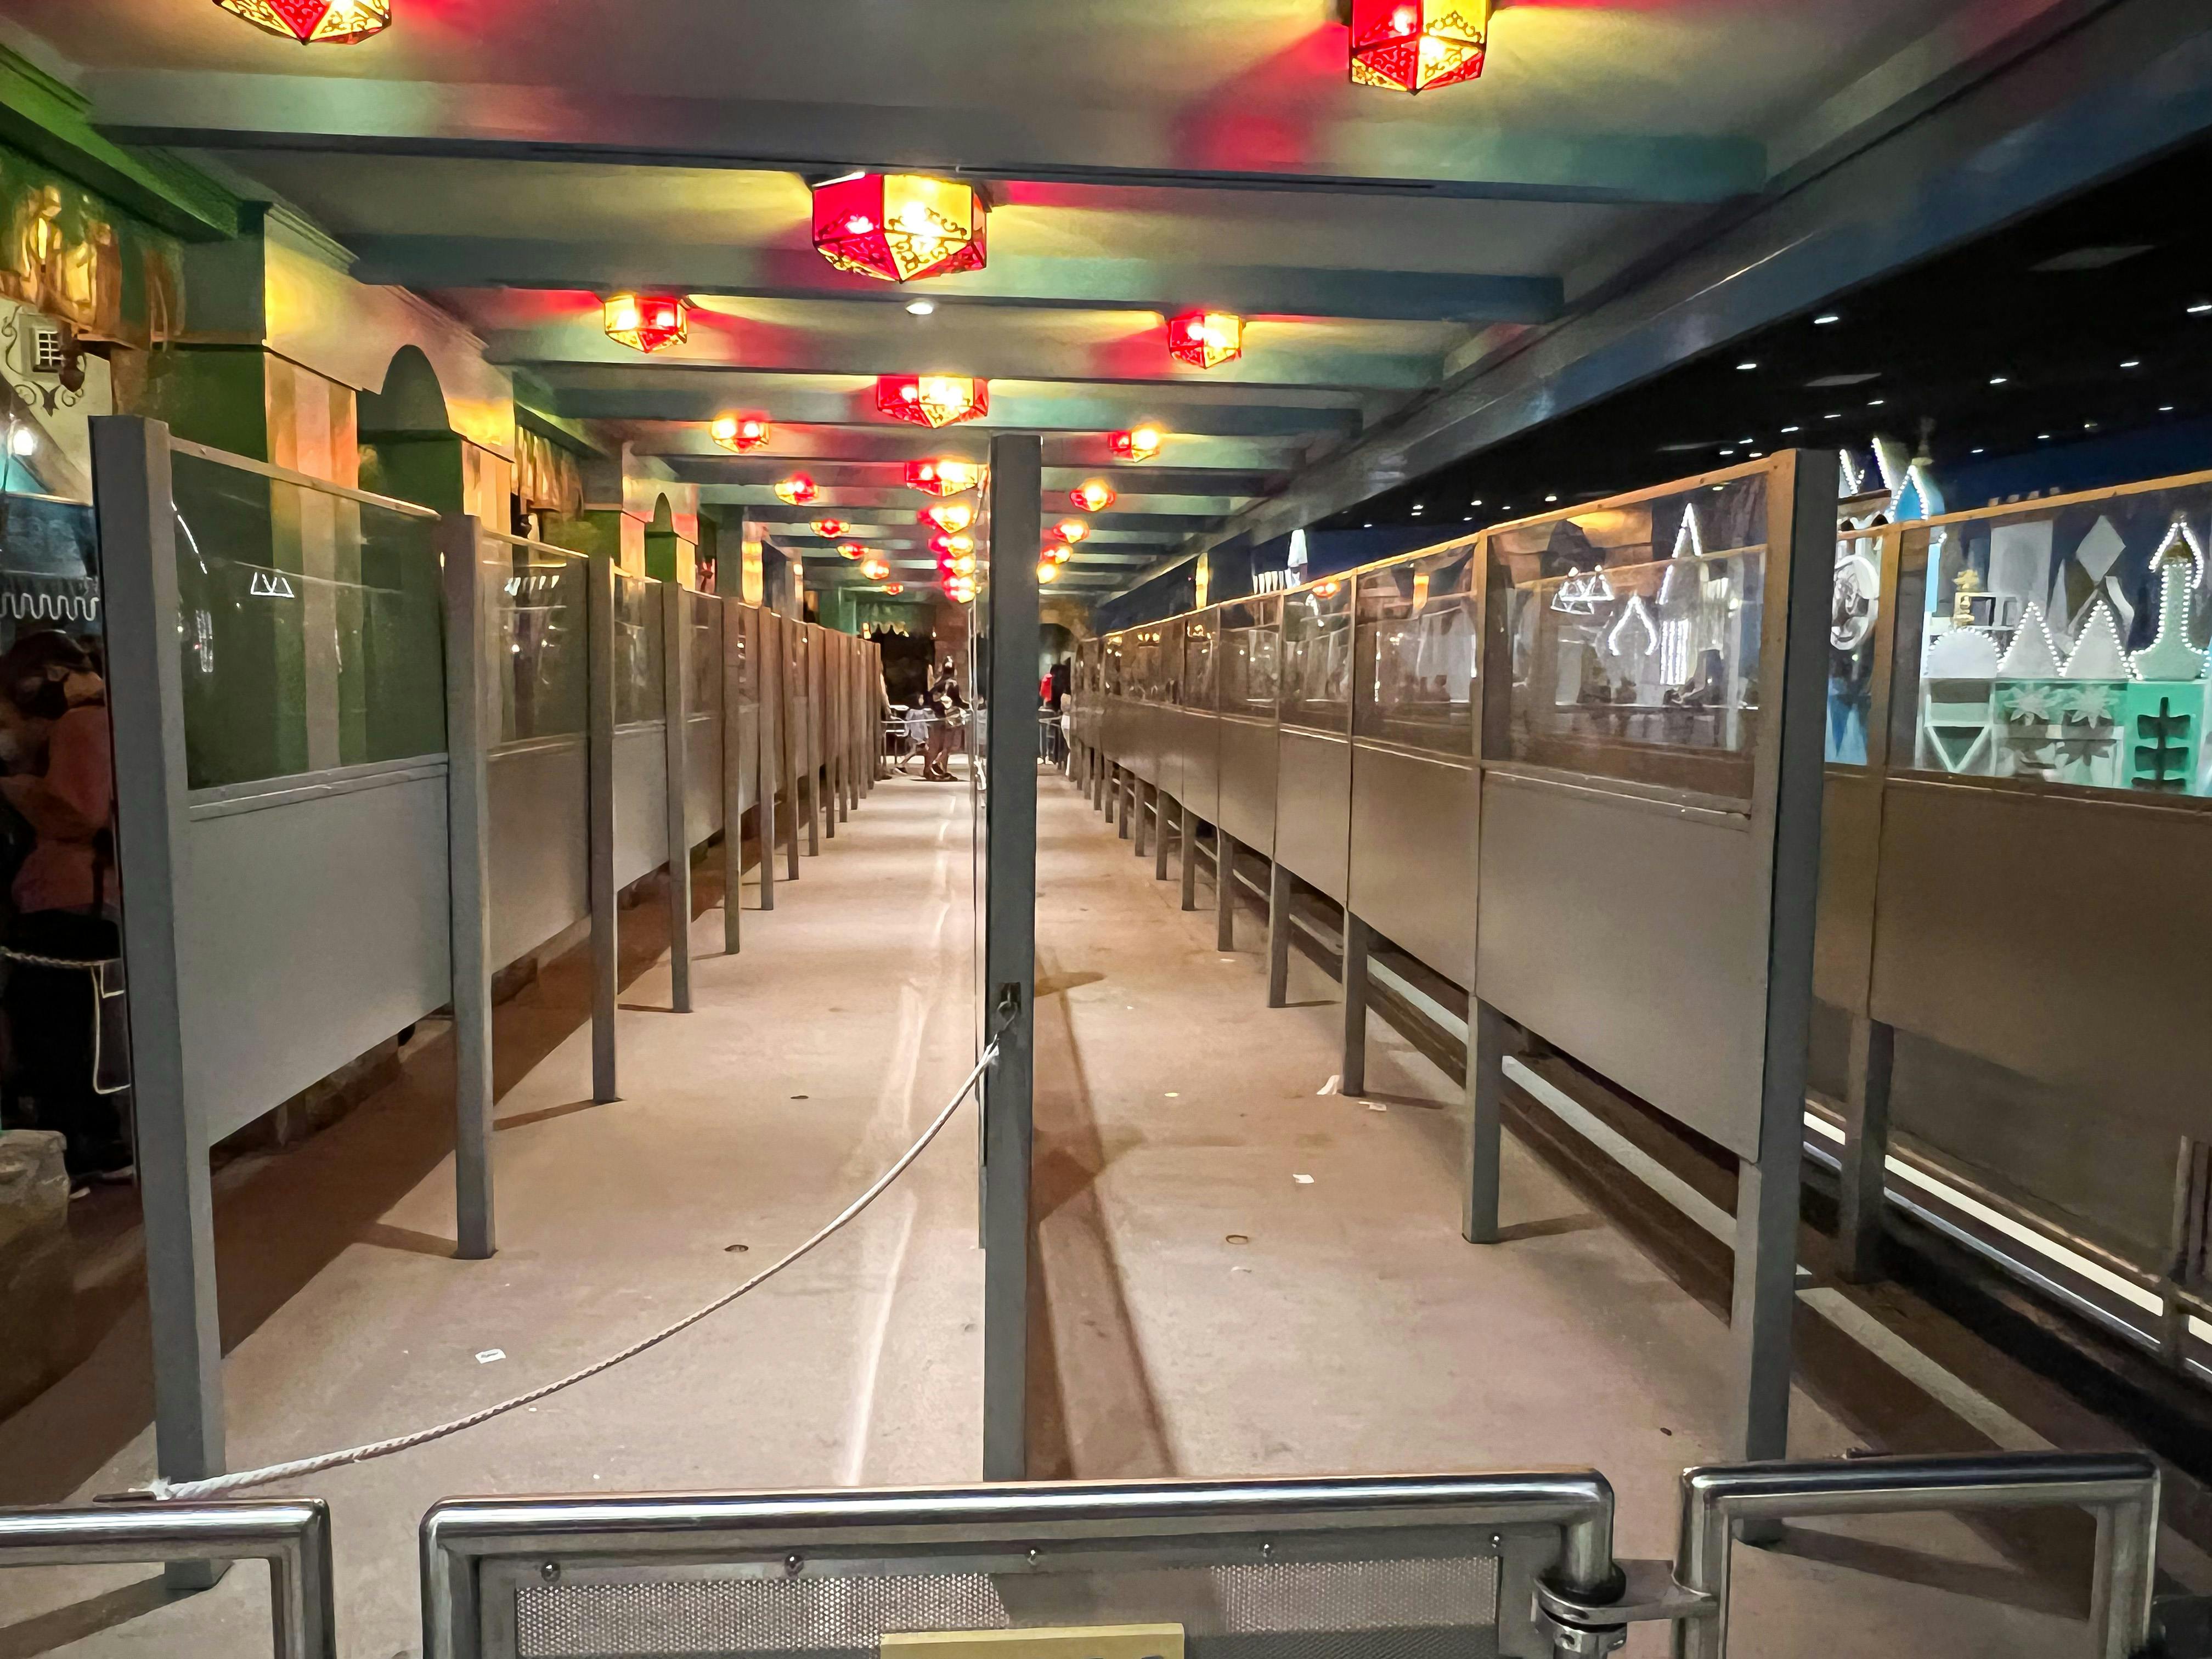 An empty area where people usually line up for a ride at Disney World.